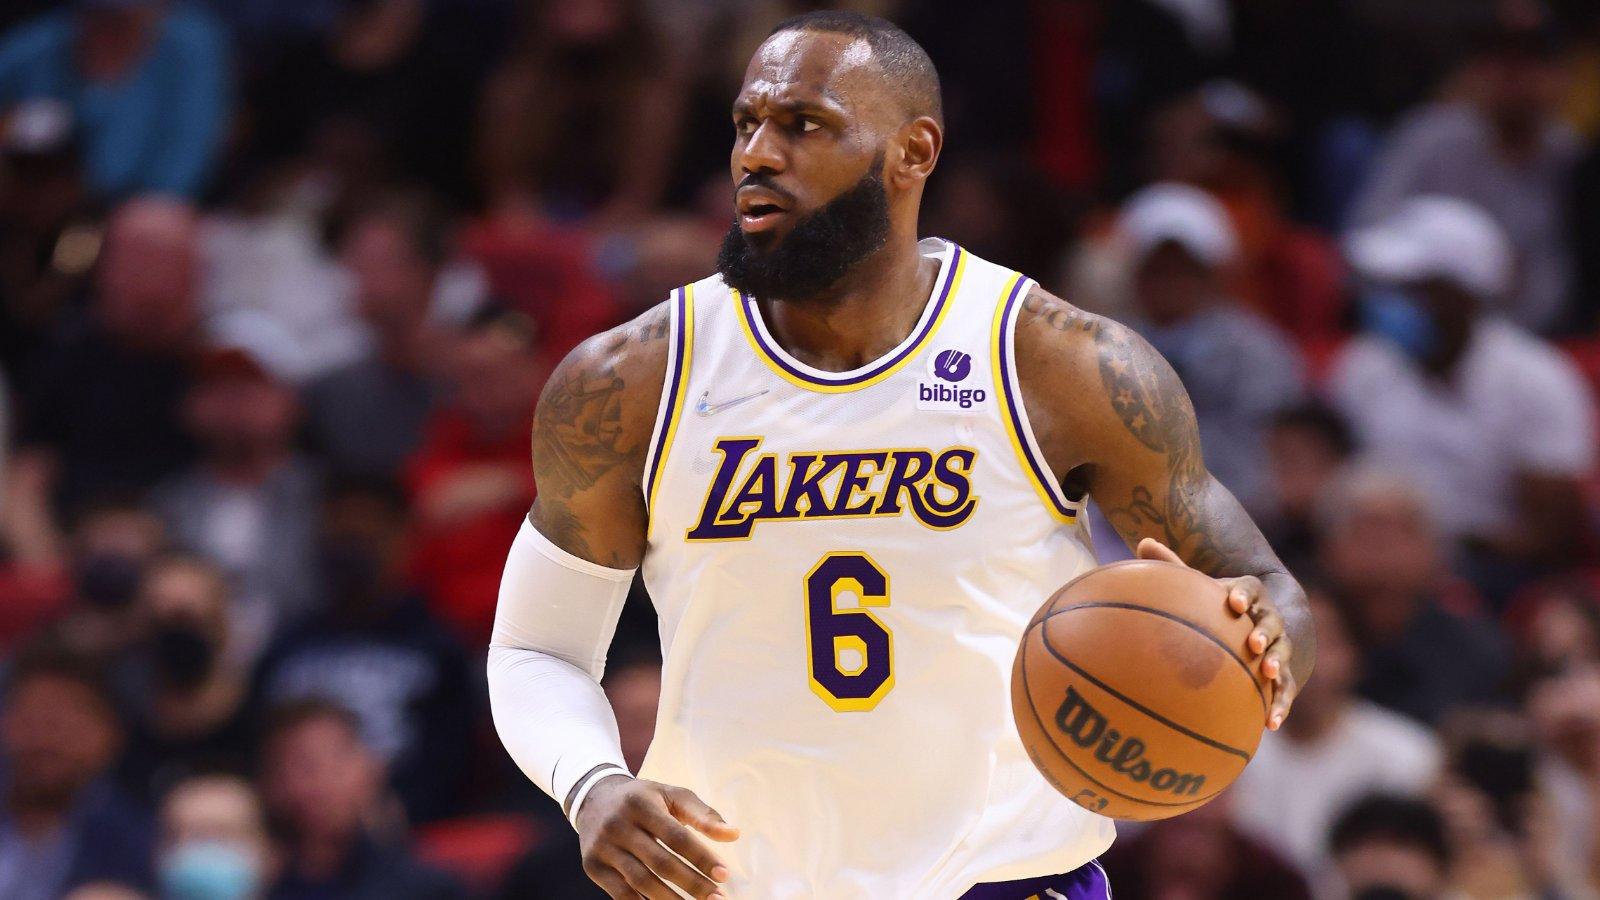 LeBron James making plays for the Lakers